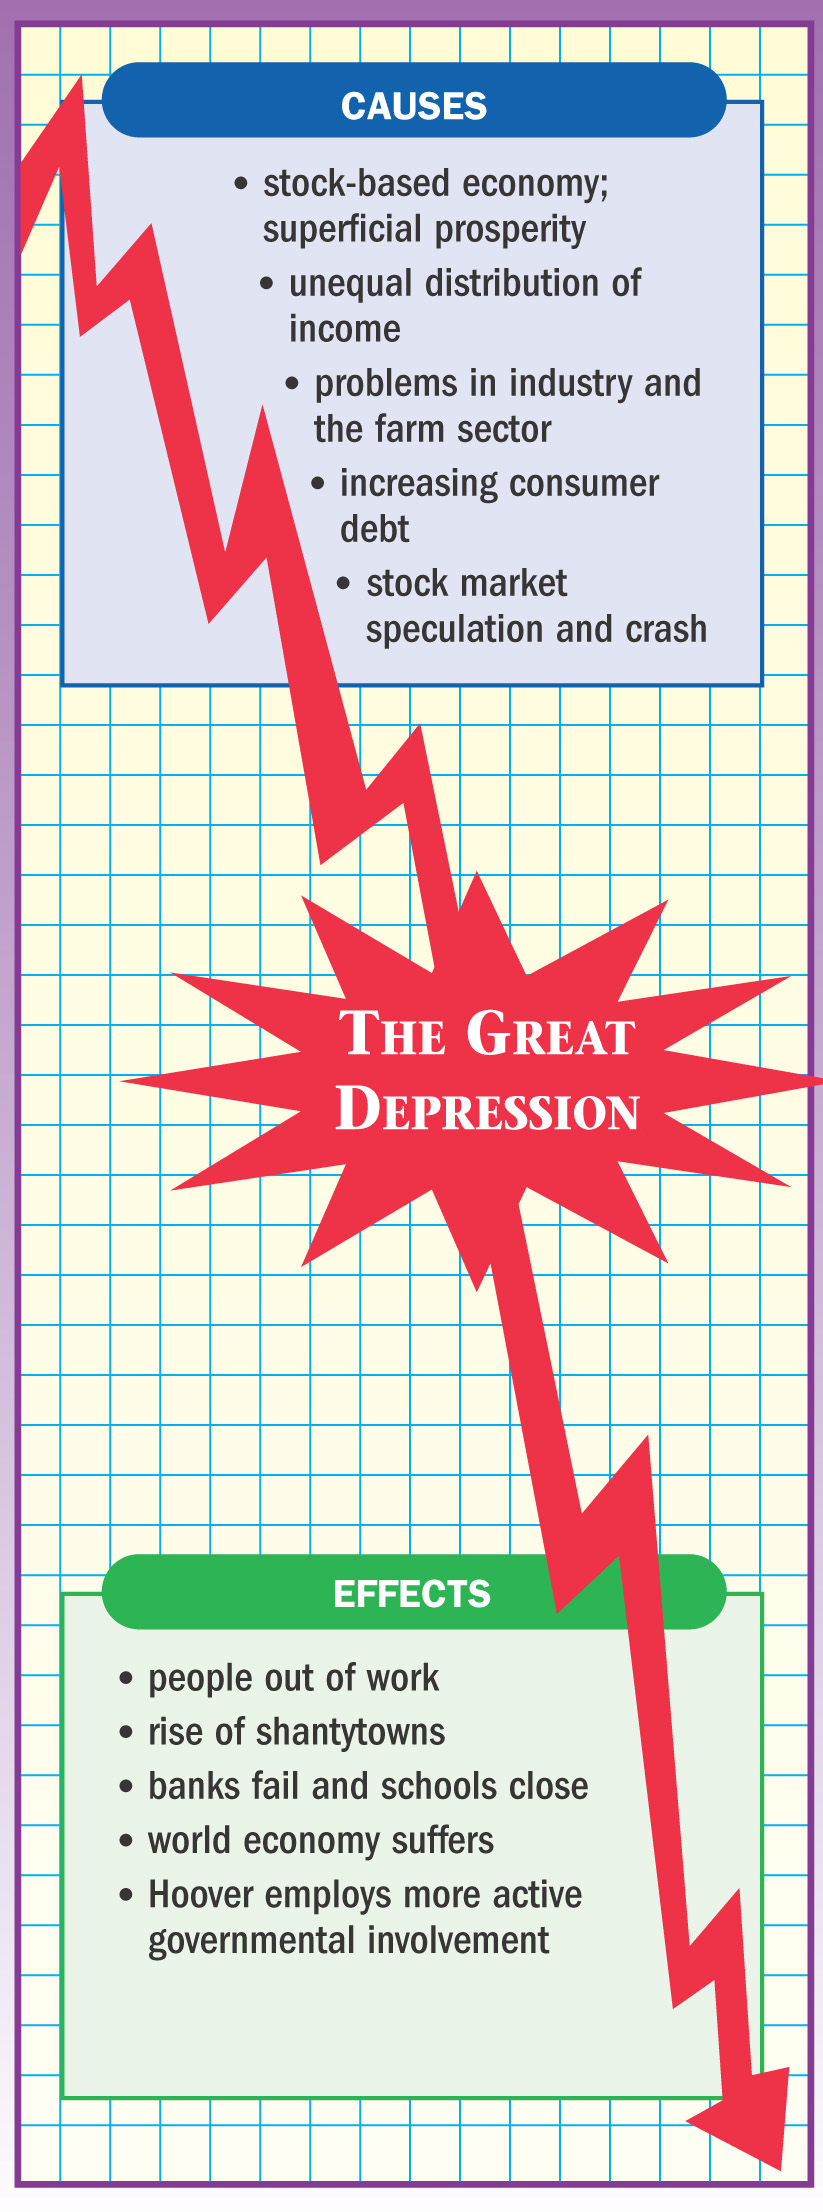 Illustration: lists causes and effects of The Great Depression